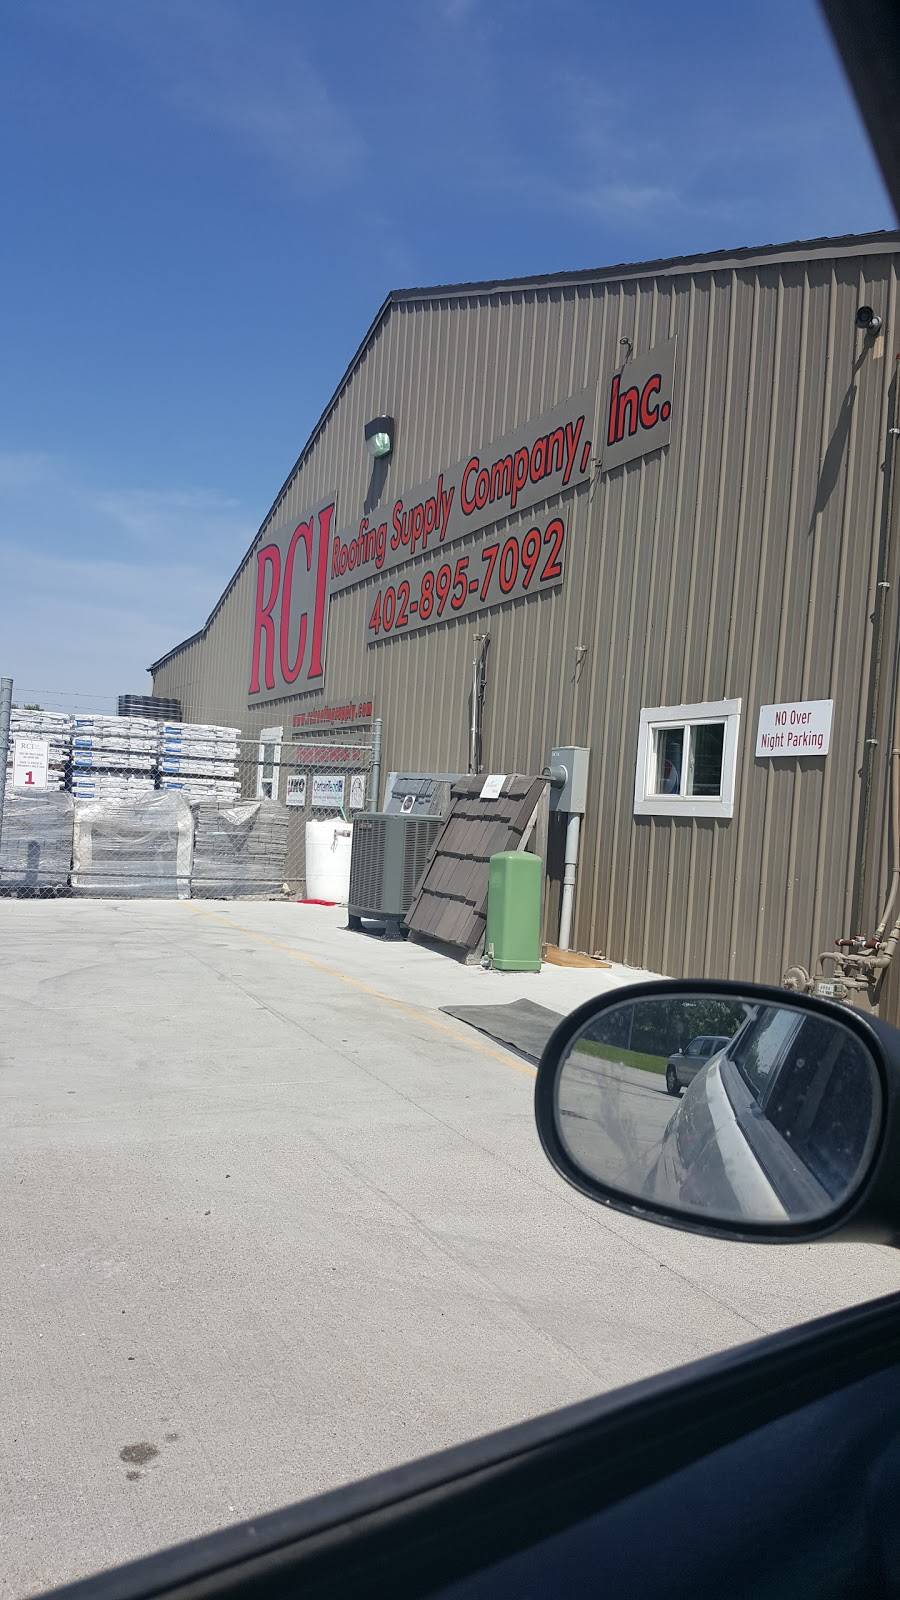 RCI Roofing Supply, A Beacon Roofing Supply Company | 7702 S 168th St, Omaha, NE 68136, USA | Phone: (402) 895-7092